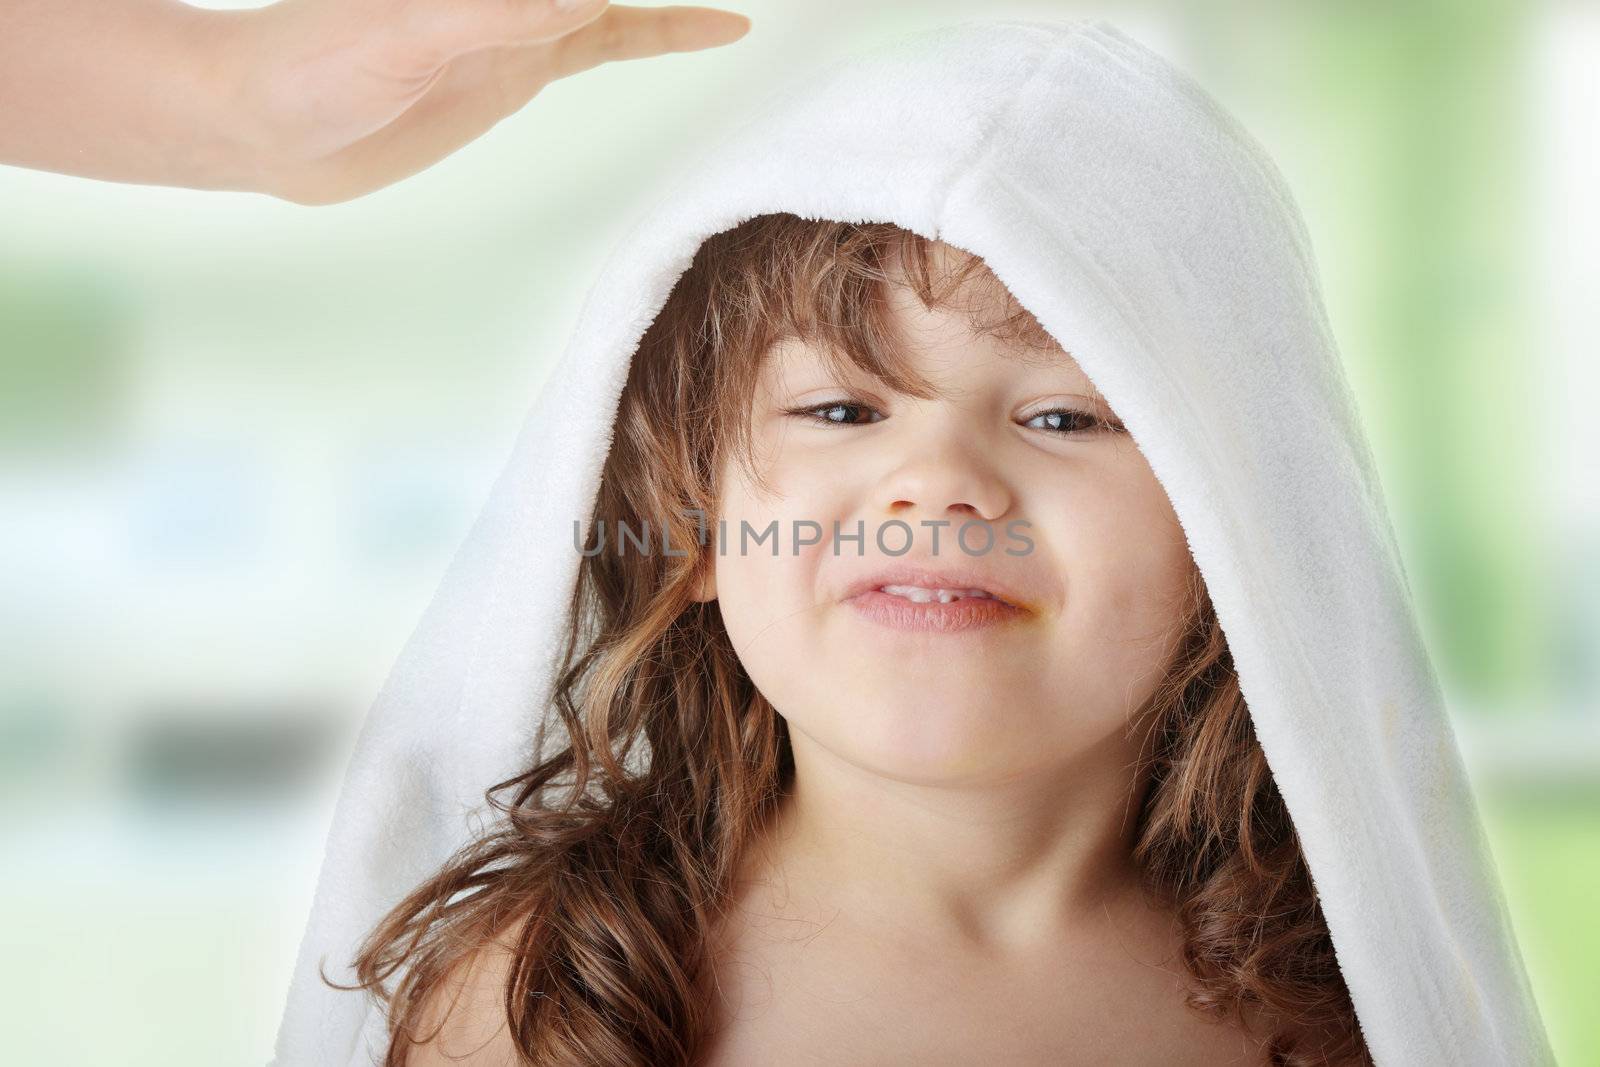 Portrait of a 5 year old girl after bath, isolated on white background